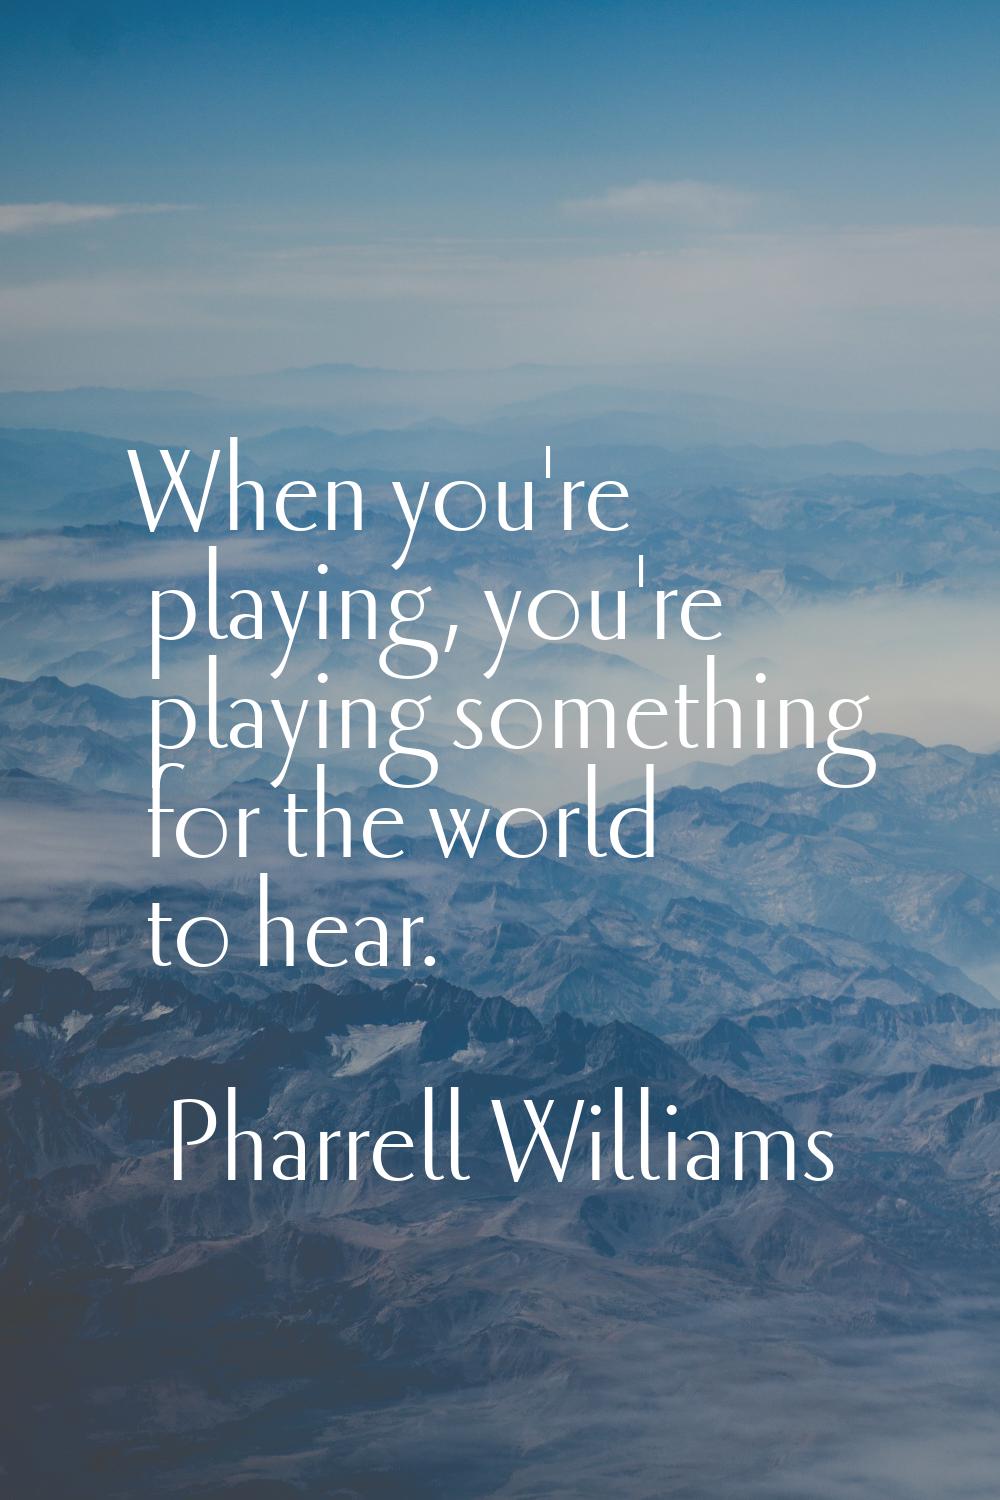 When you're playing, you're playing something for the world to hear.